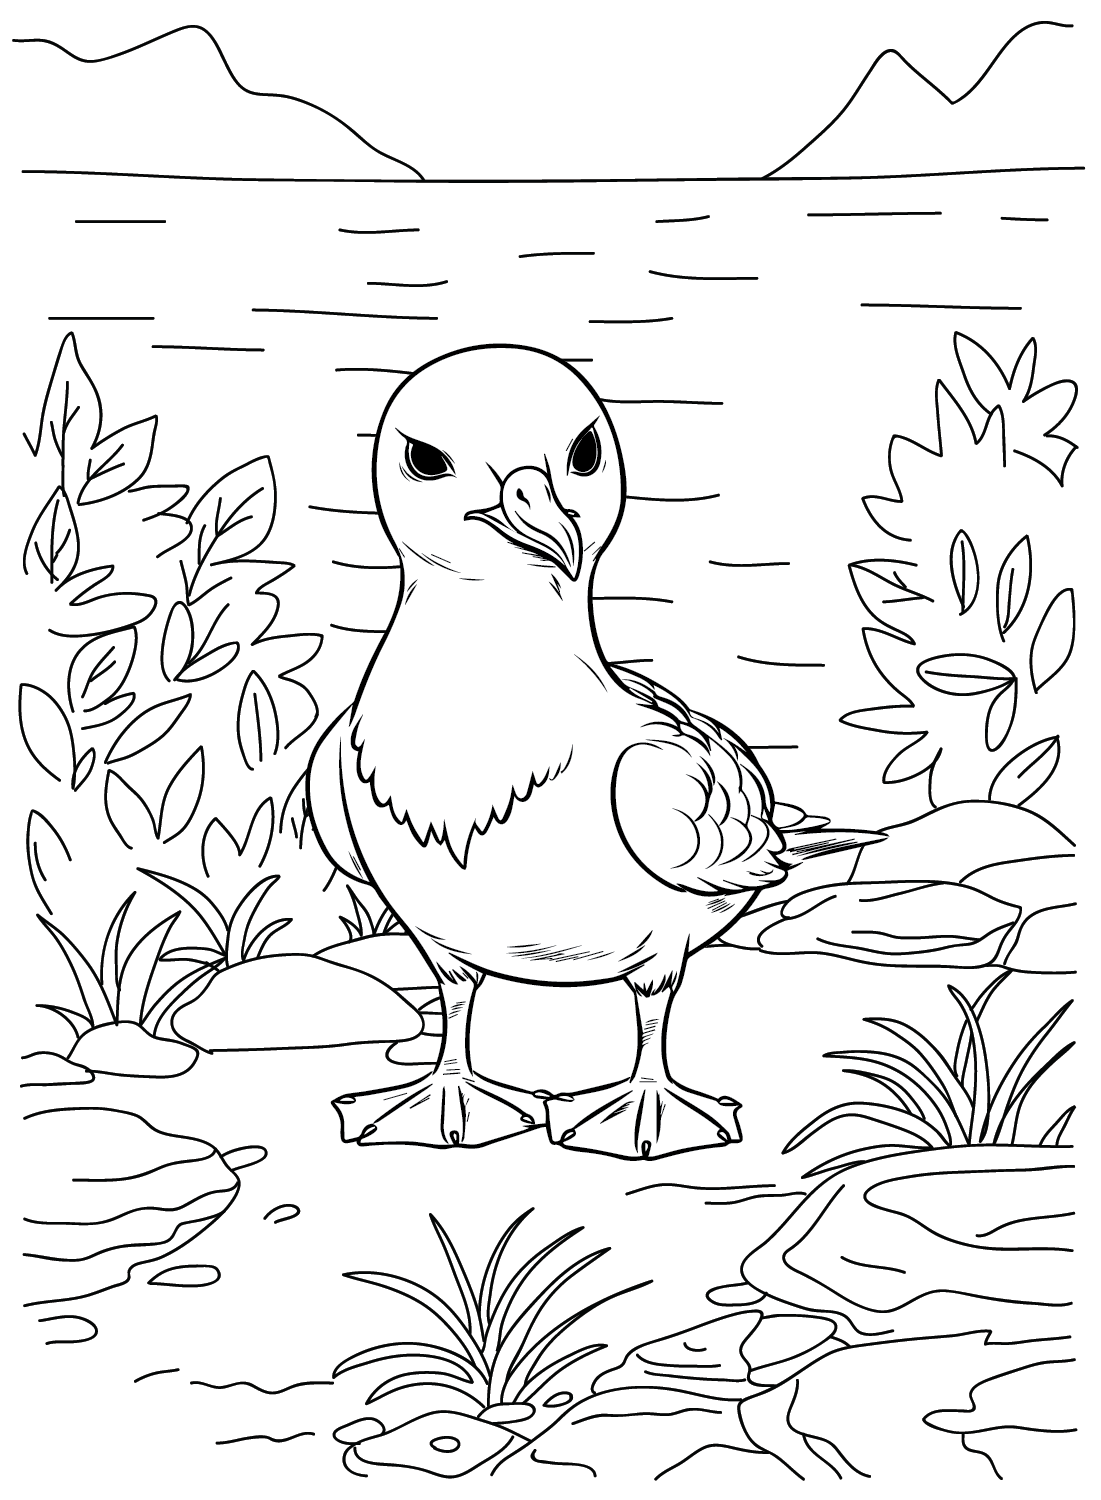 Cute Albatross Coloring Page from Albatross